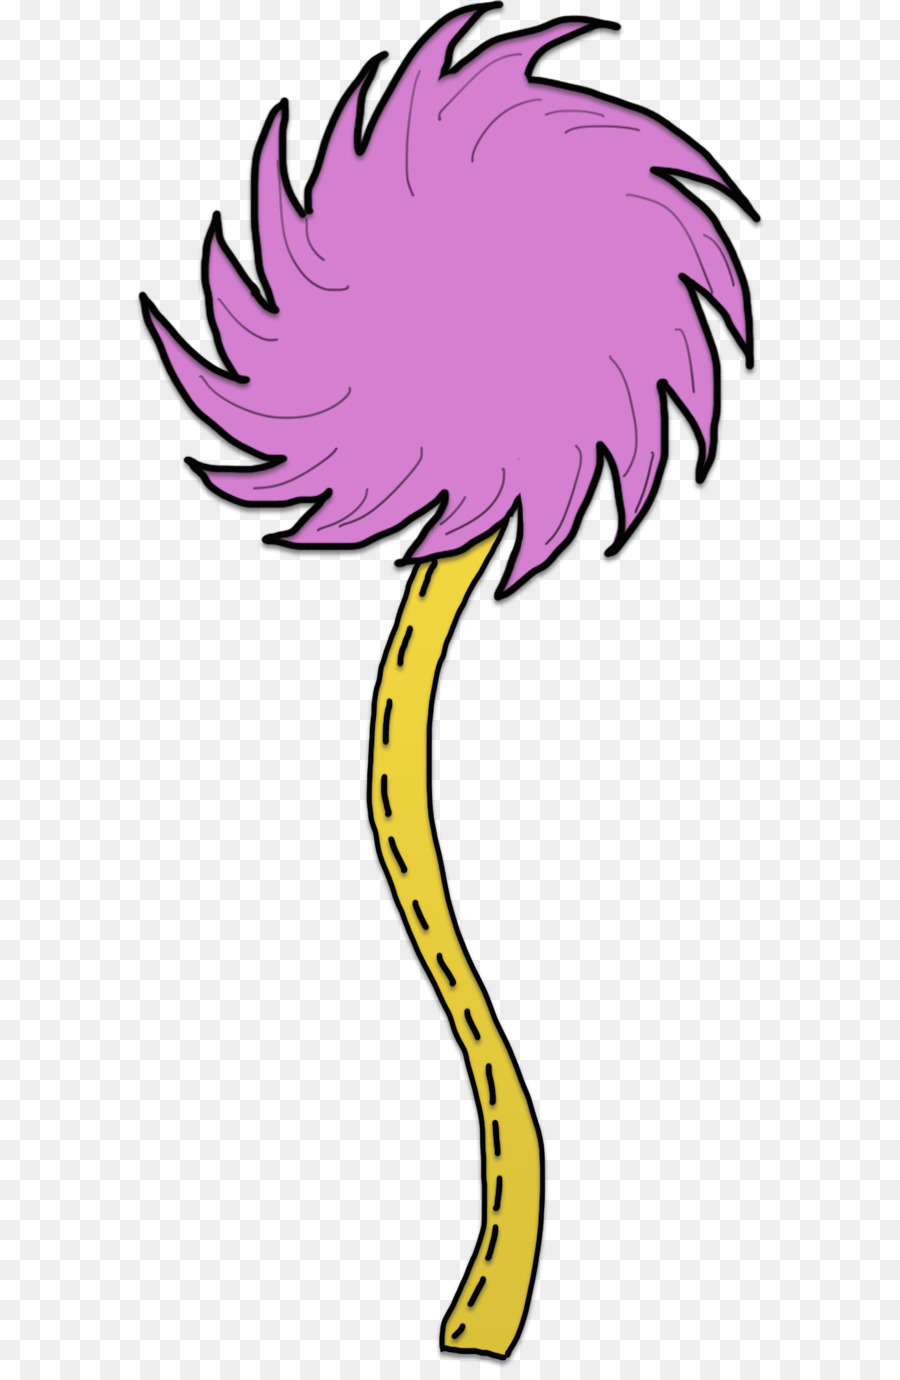 The Lorax YouTube Clip art - dr seuss png download - 632*1369 - Free Transparent Lorax png Download.